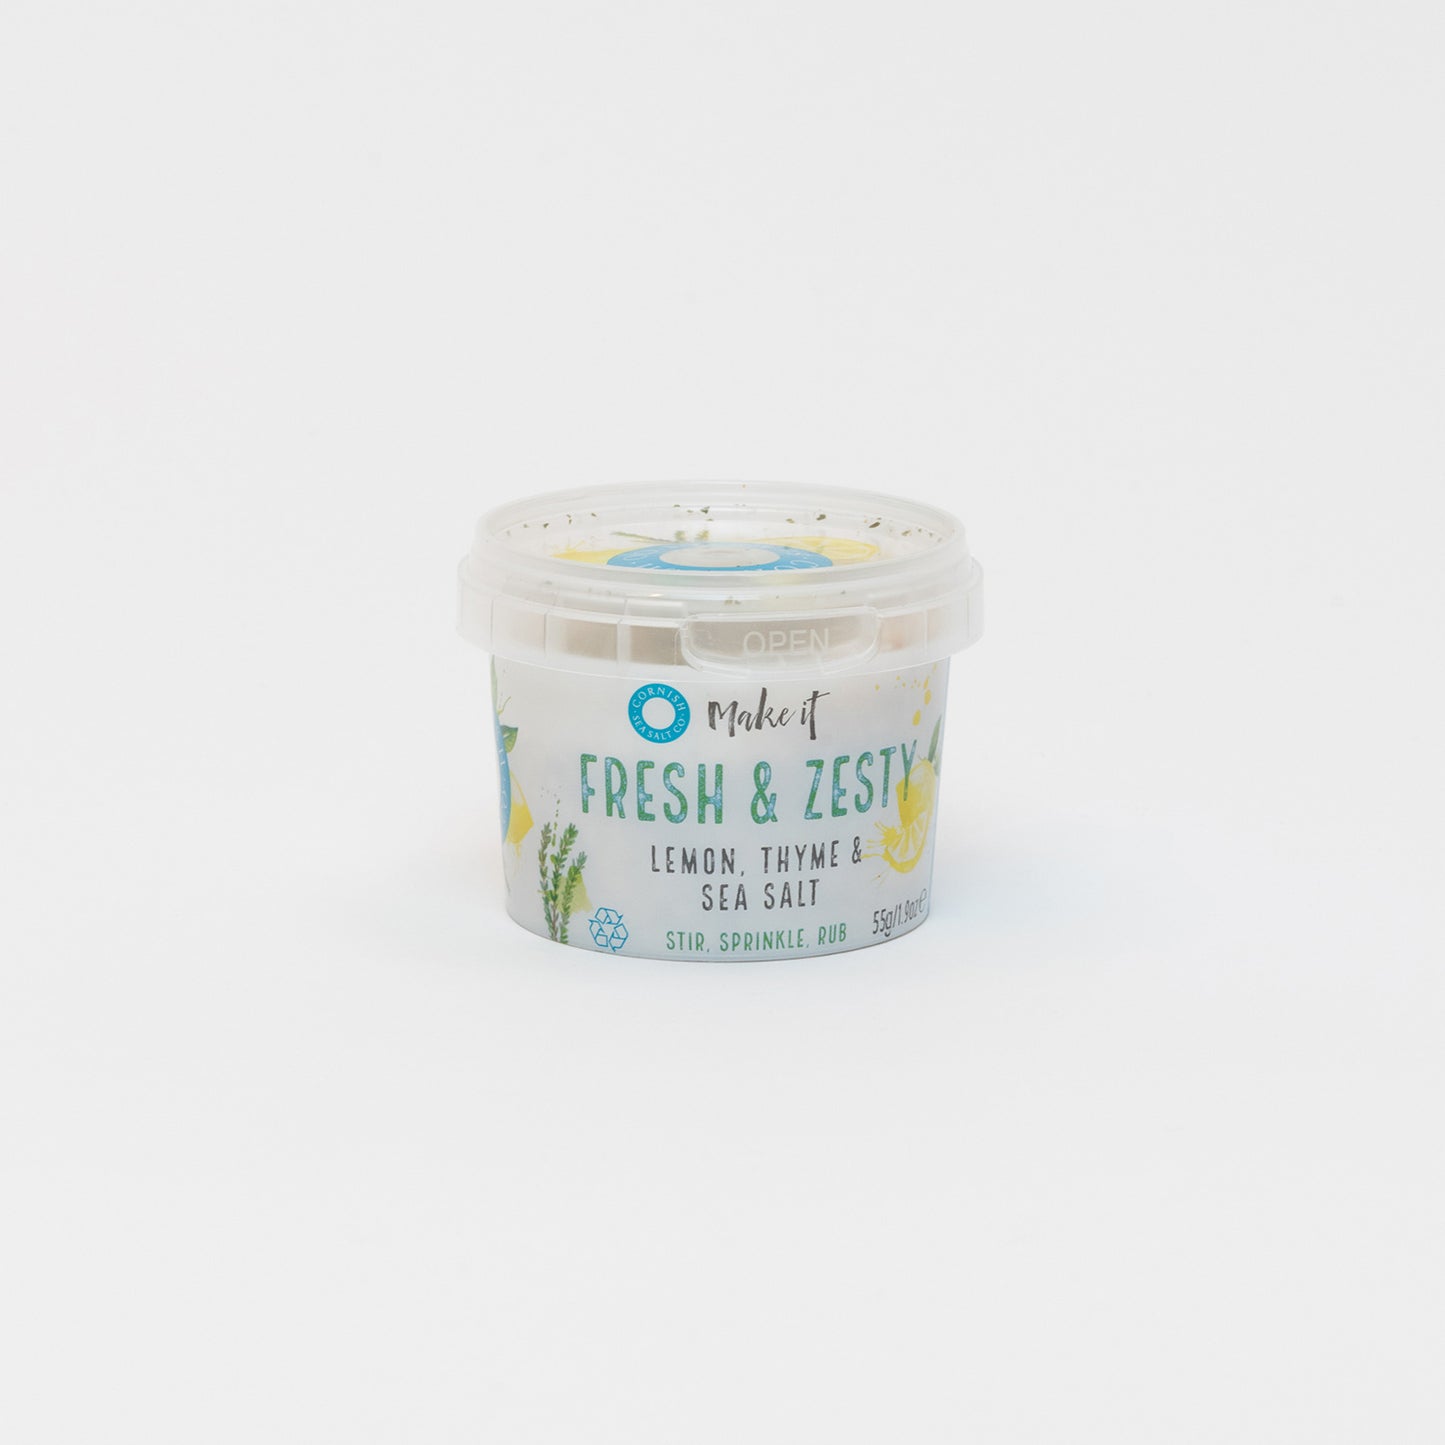 A Fresh & Zesty pinch pot from Cornish Sea Salt pictured on a white background.